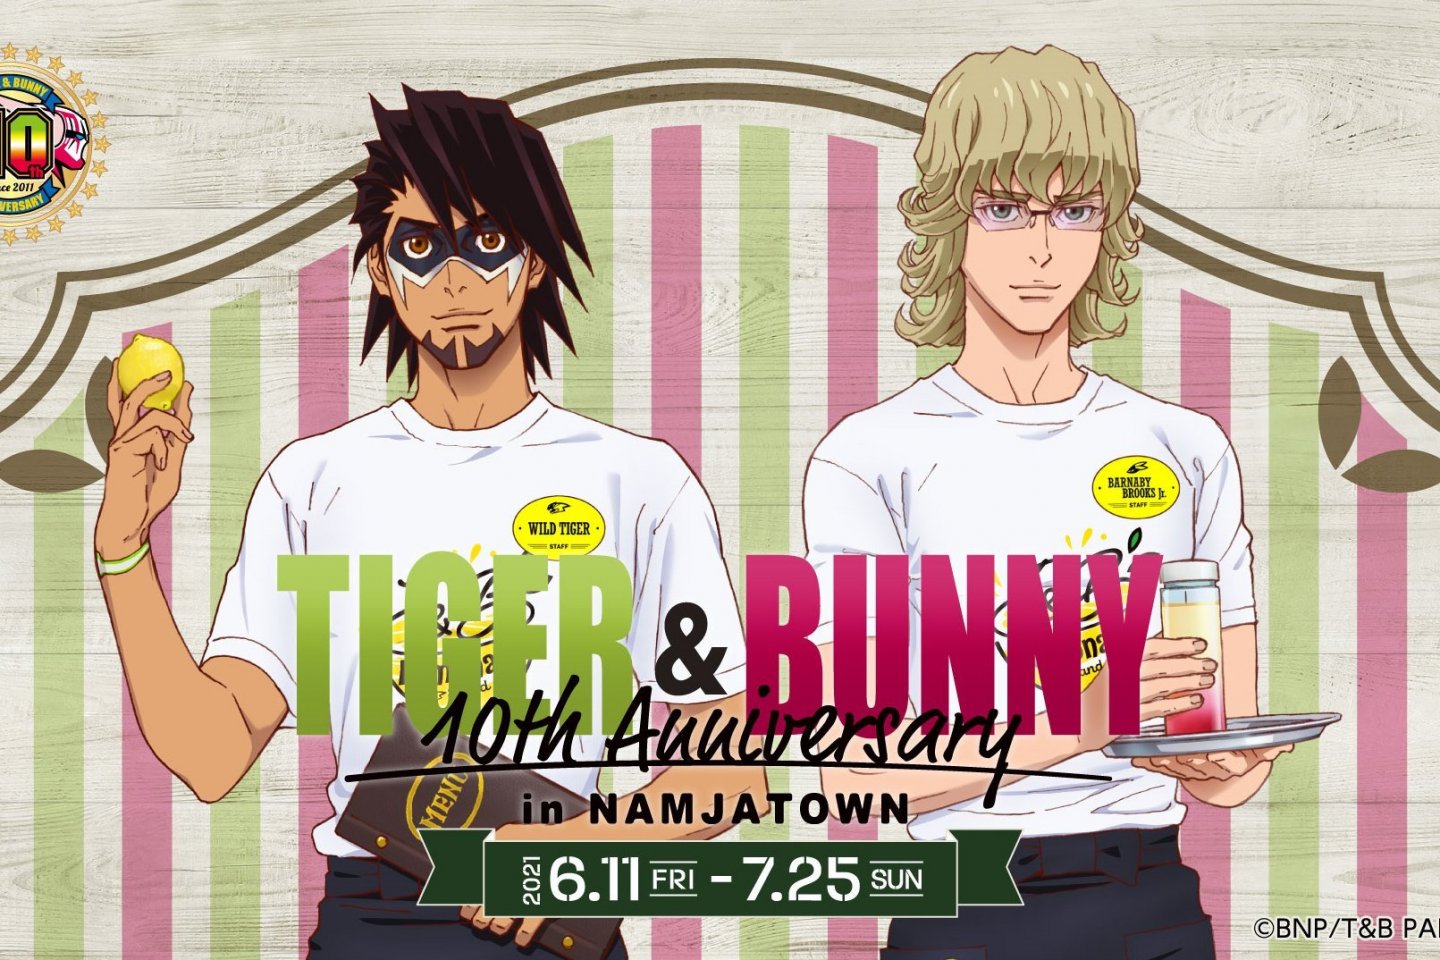 The event celebrates the 10th anniversary of the Tiger and Bunny series